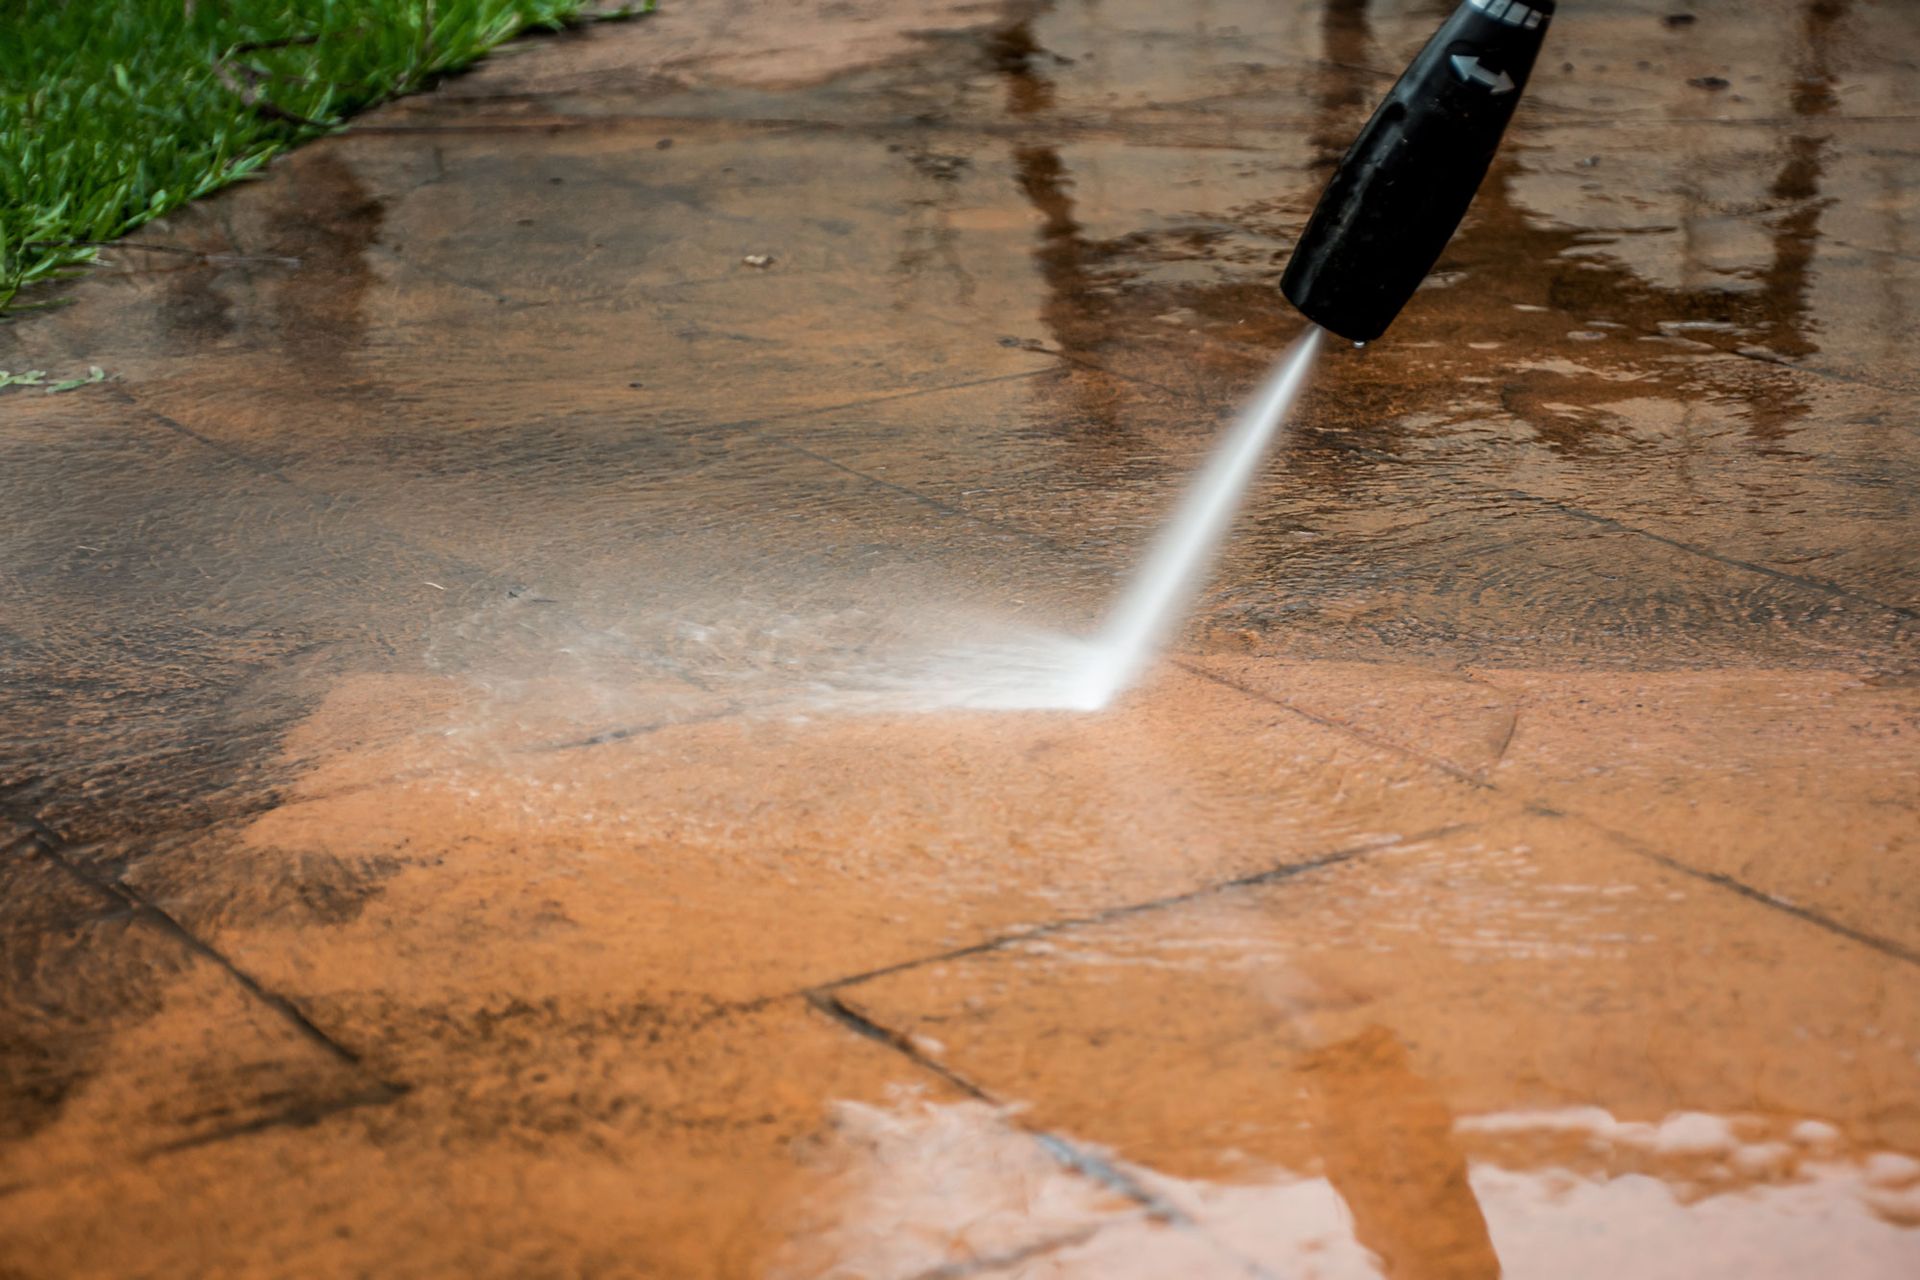 A person is using a high pressure washer to clean a patio.